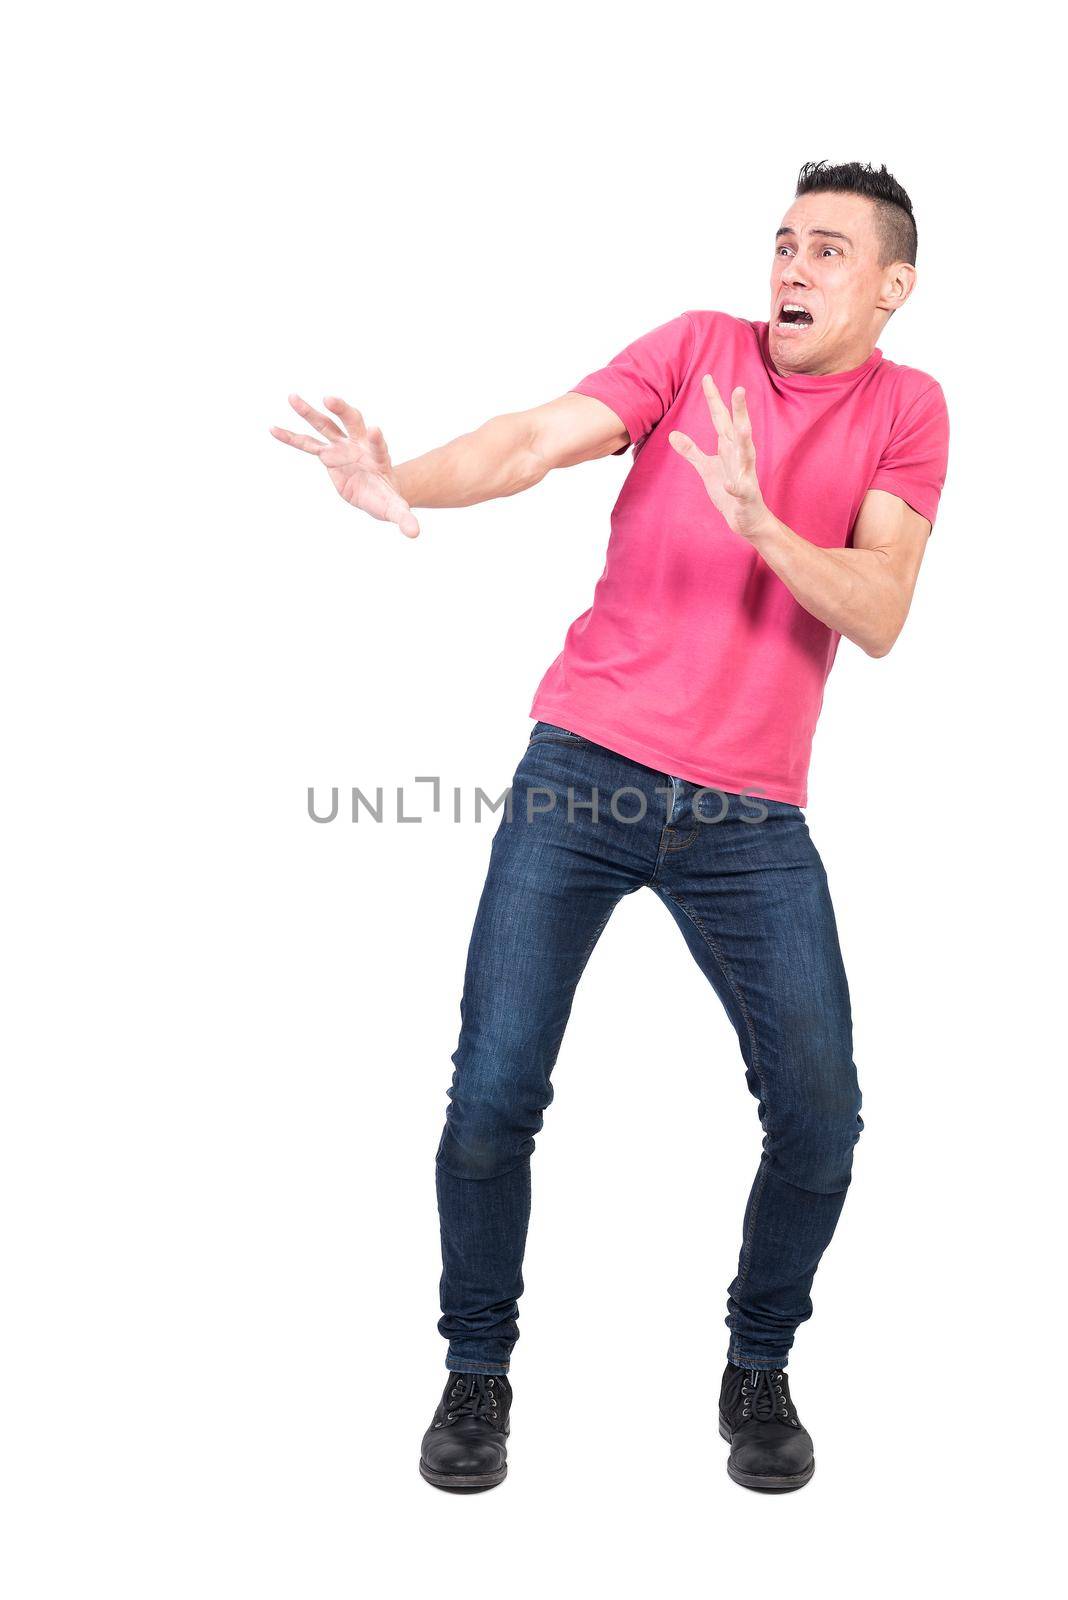 Full length terrified male in jeans and pink t shirt making protective gesture and looking away while yelling in horror against white background